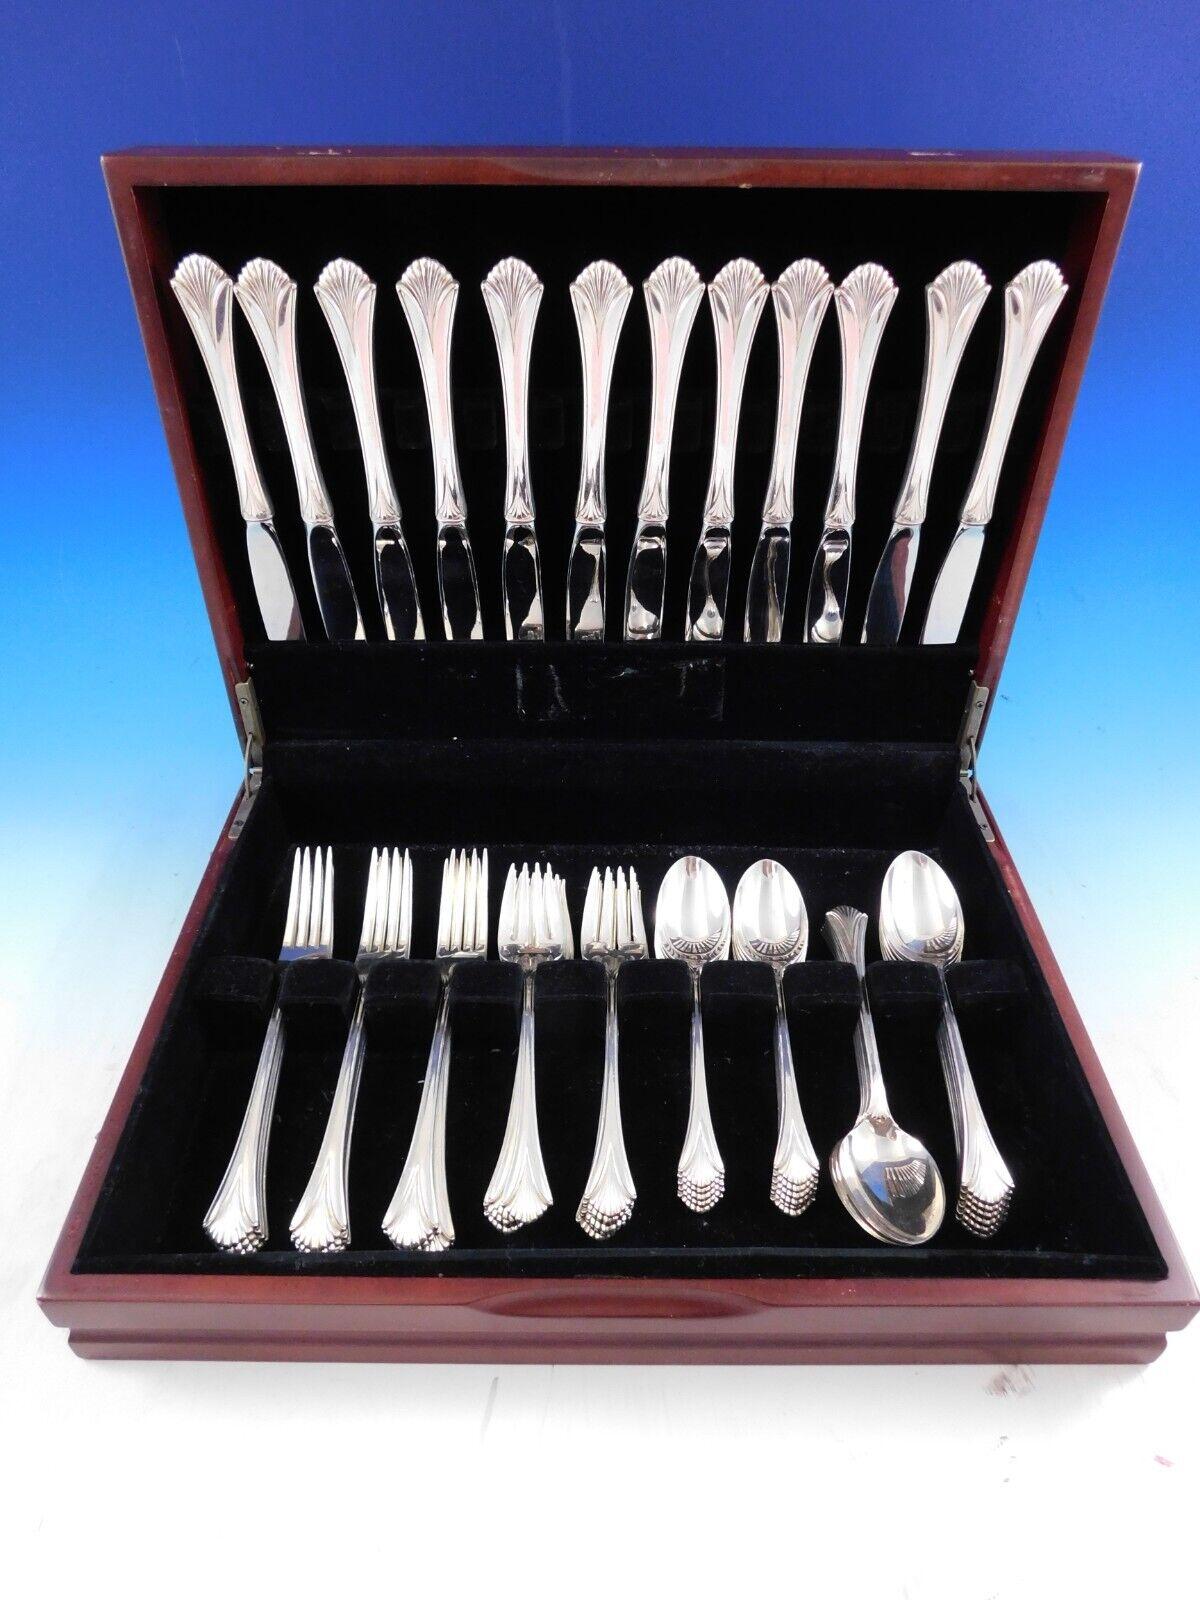 Regency shell by Lunt sterling silver flatware set, 60 pieces. This set includes:

12 knives, 9